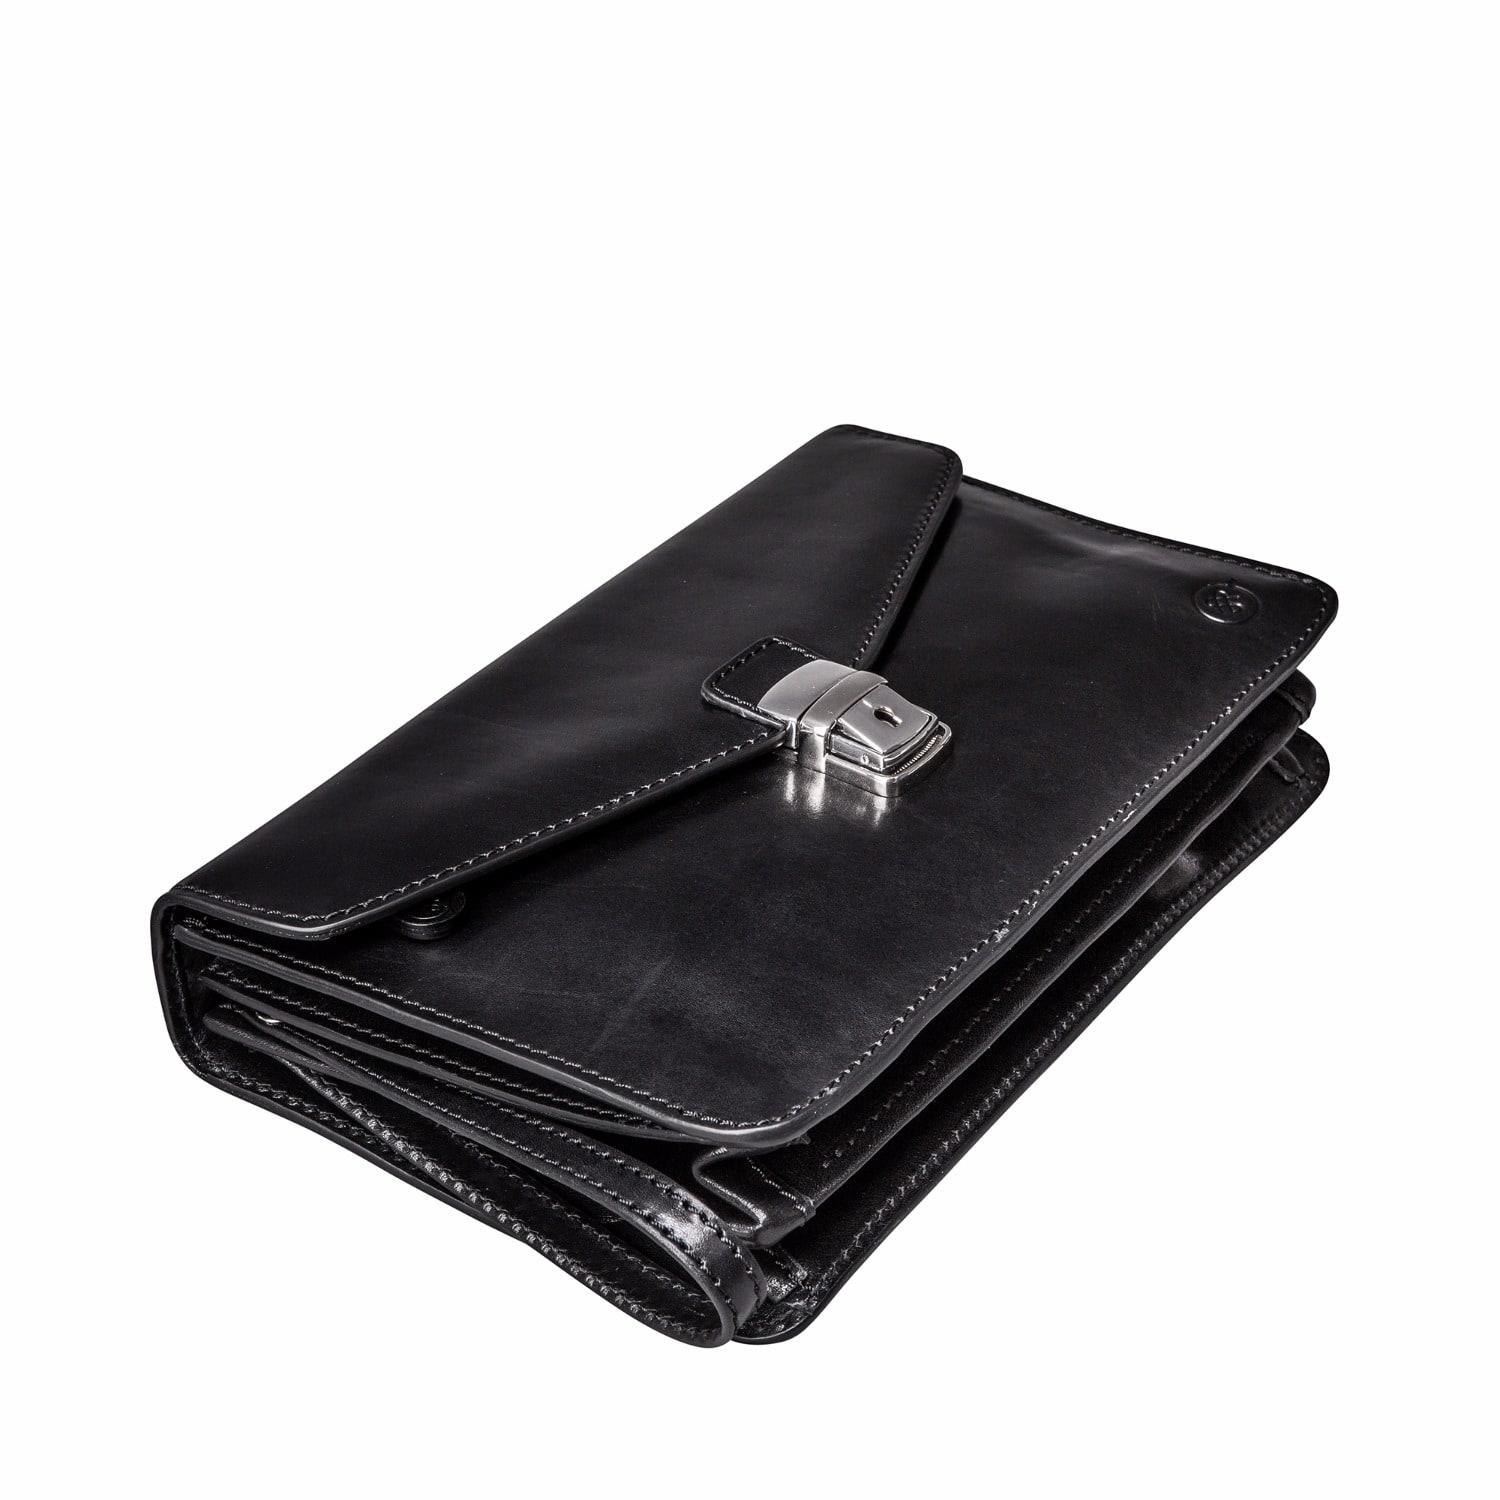 Lyst - Maxwell Scott Bags The Santino Mens Leather Clutch Bag With Wrist Strap Black in Black ...